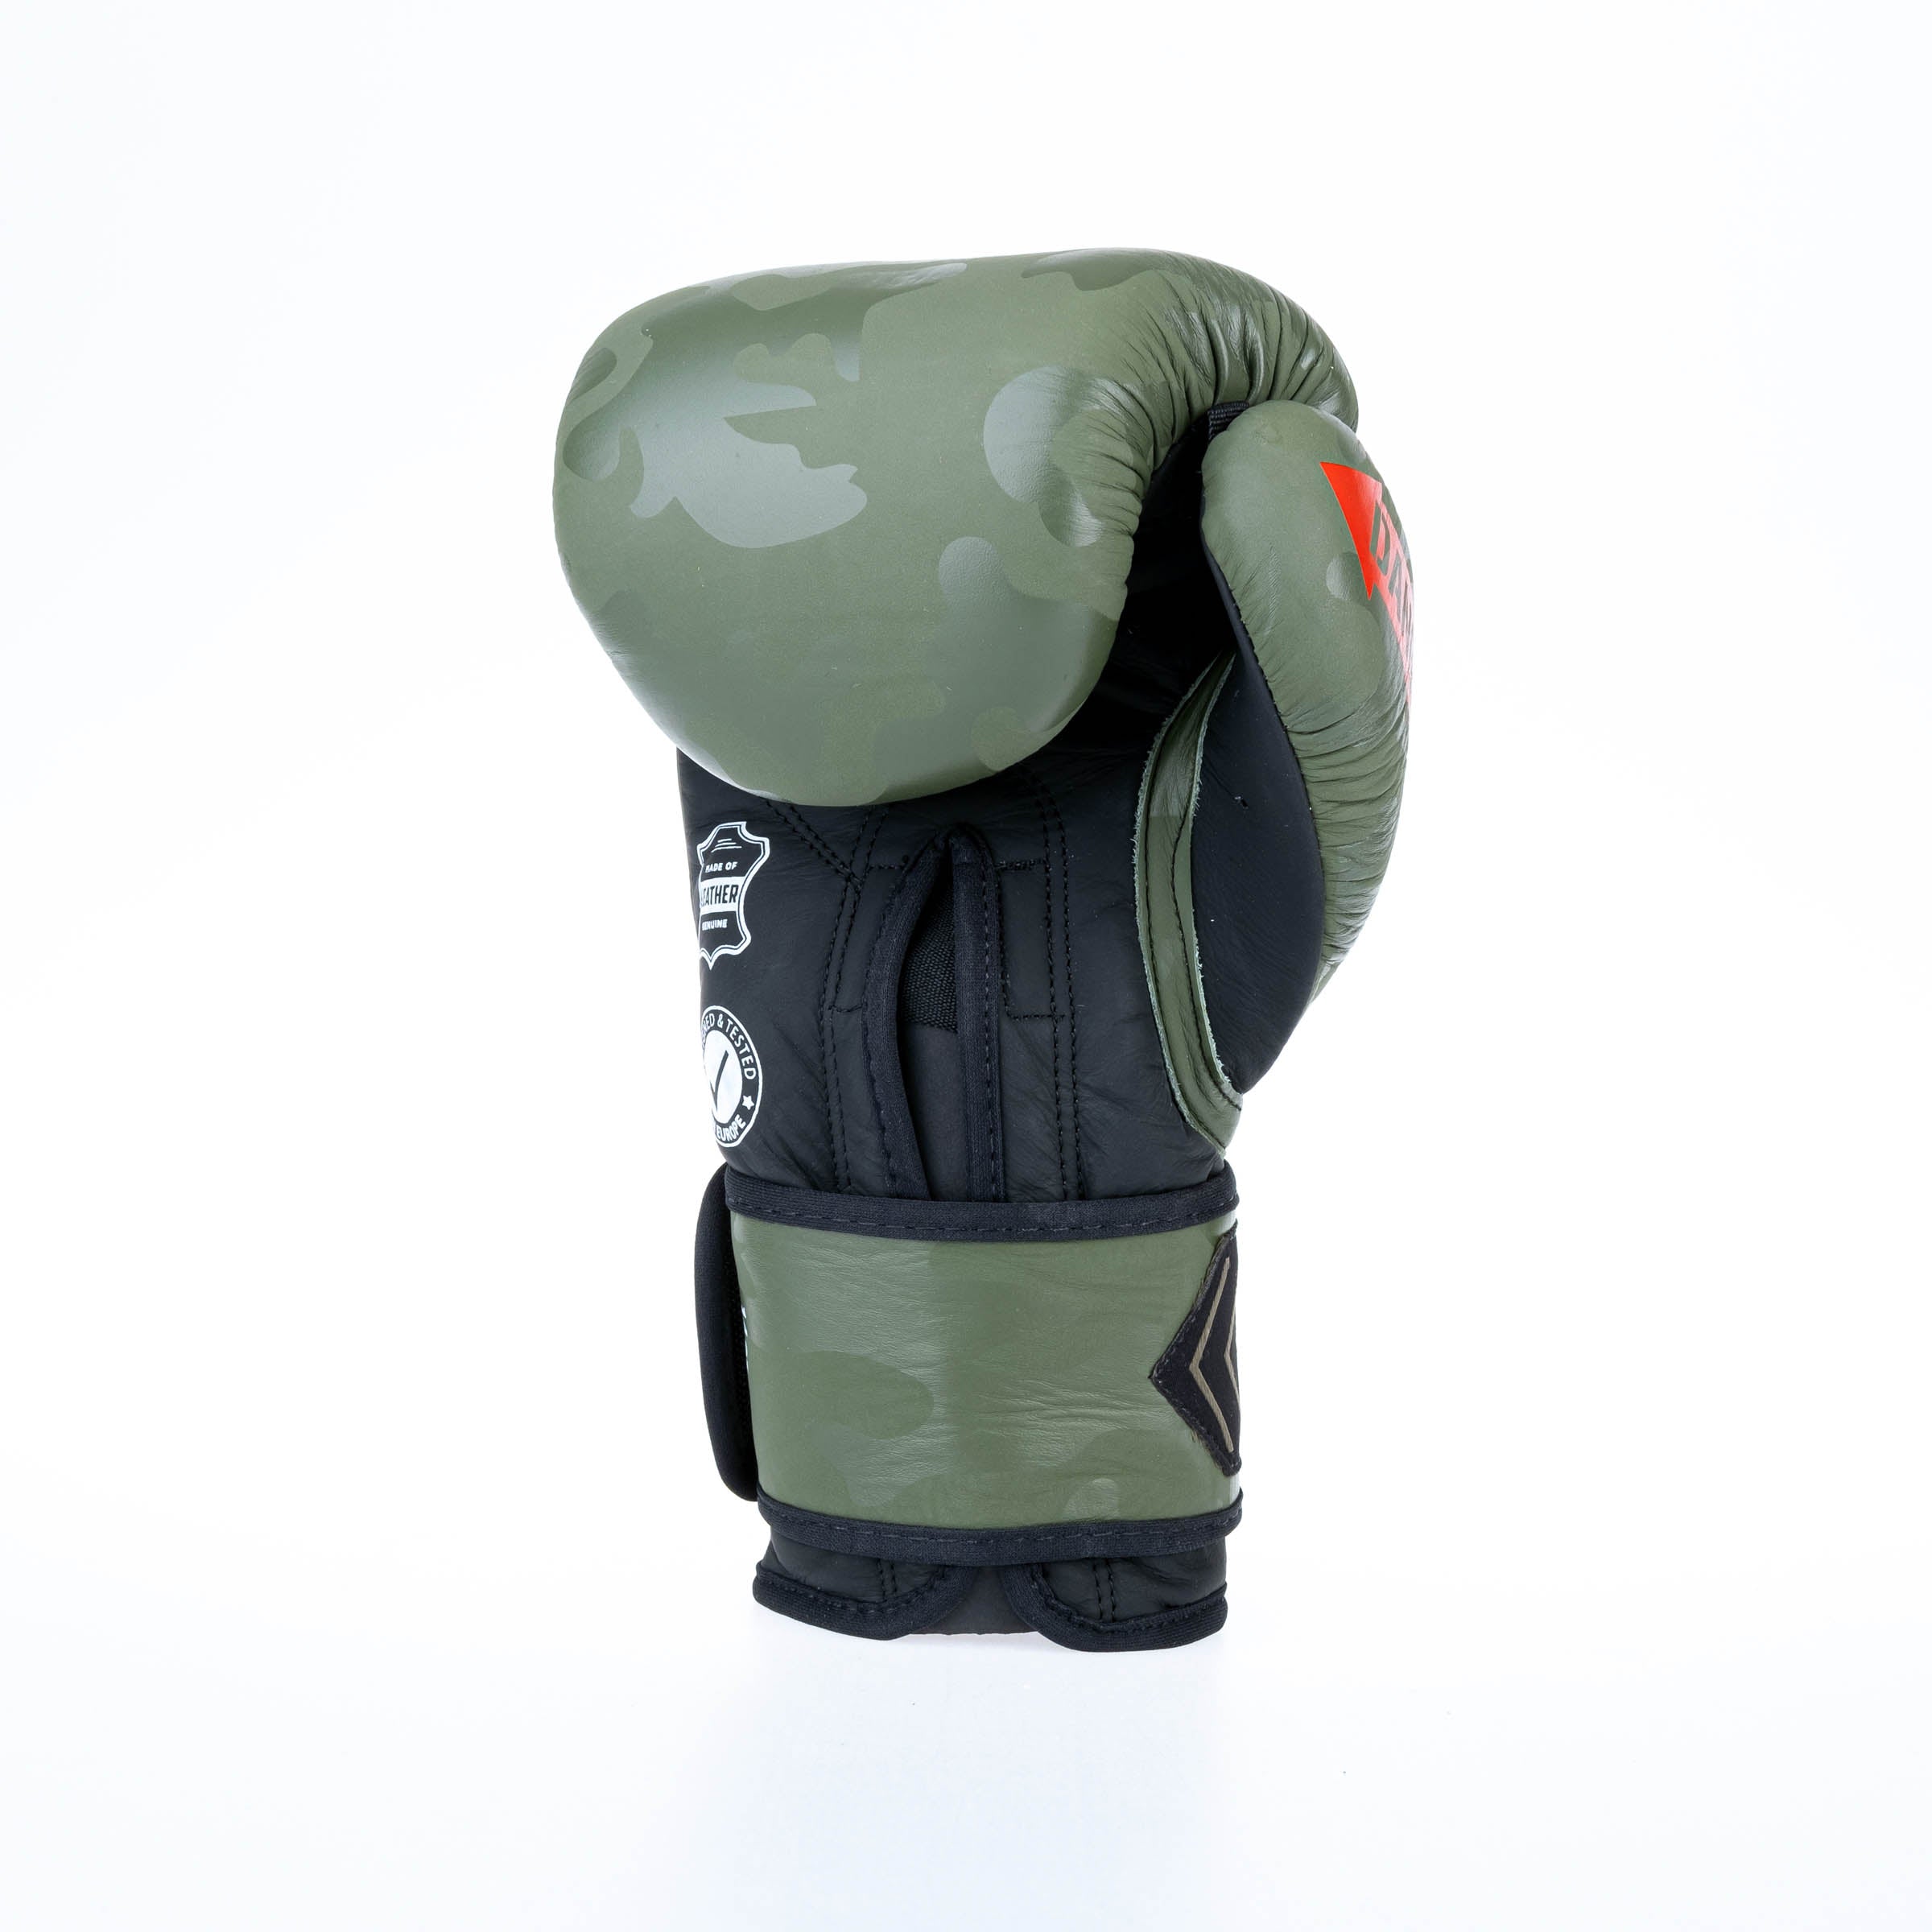 Fighter Boxing Gloves Tactical - khaki